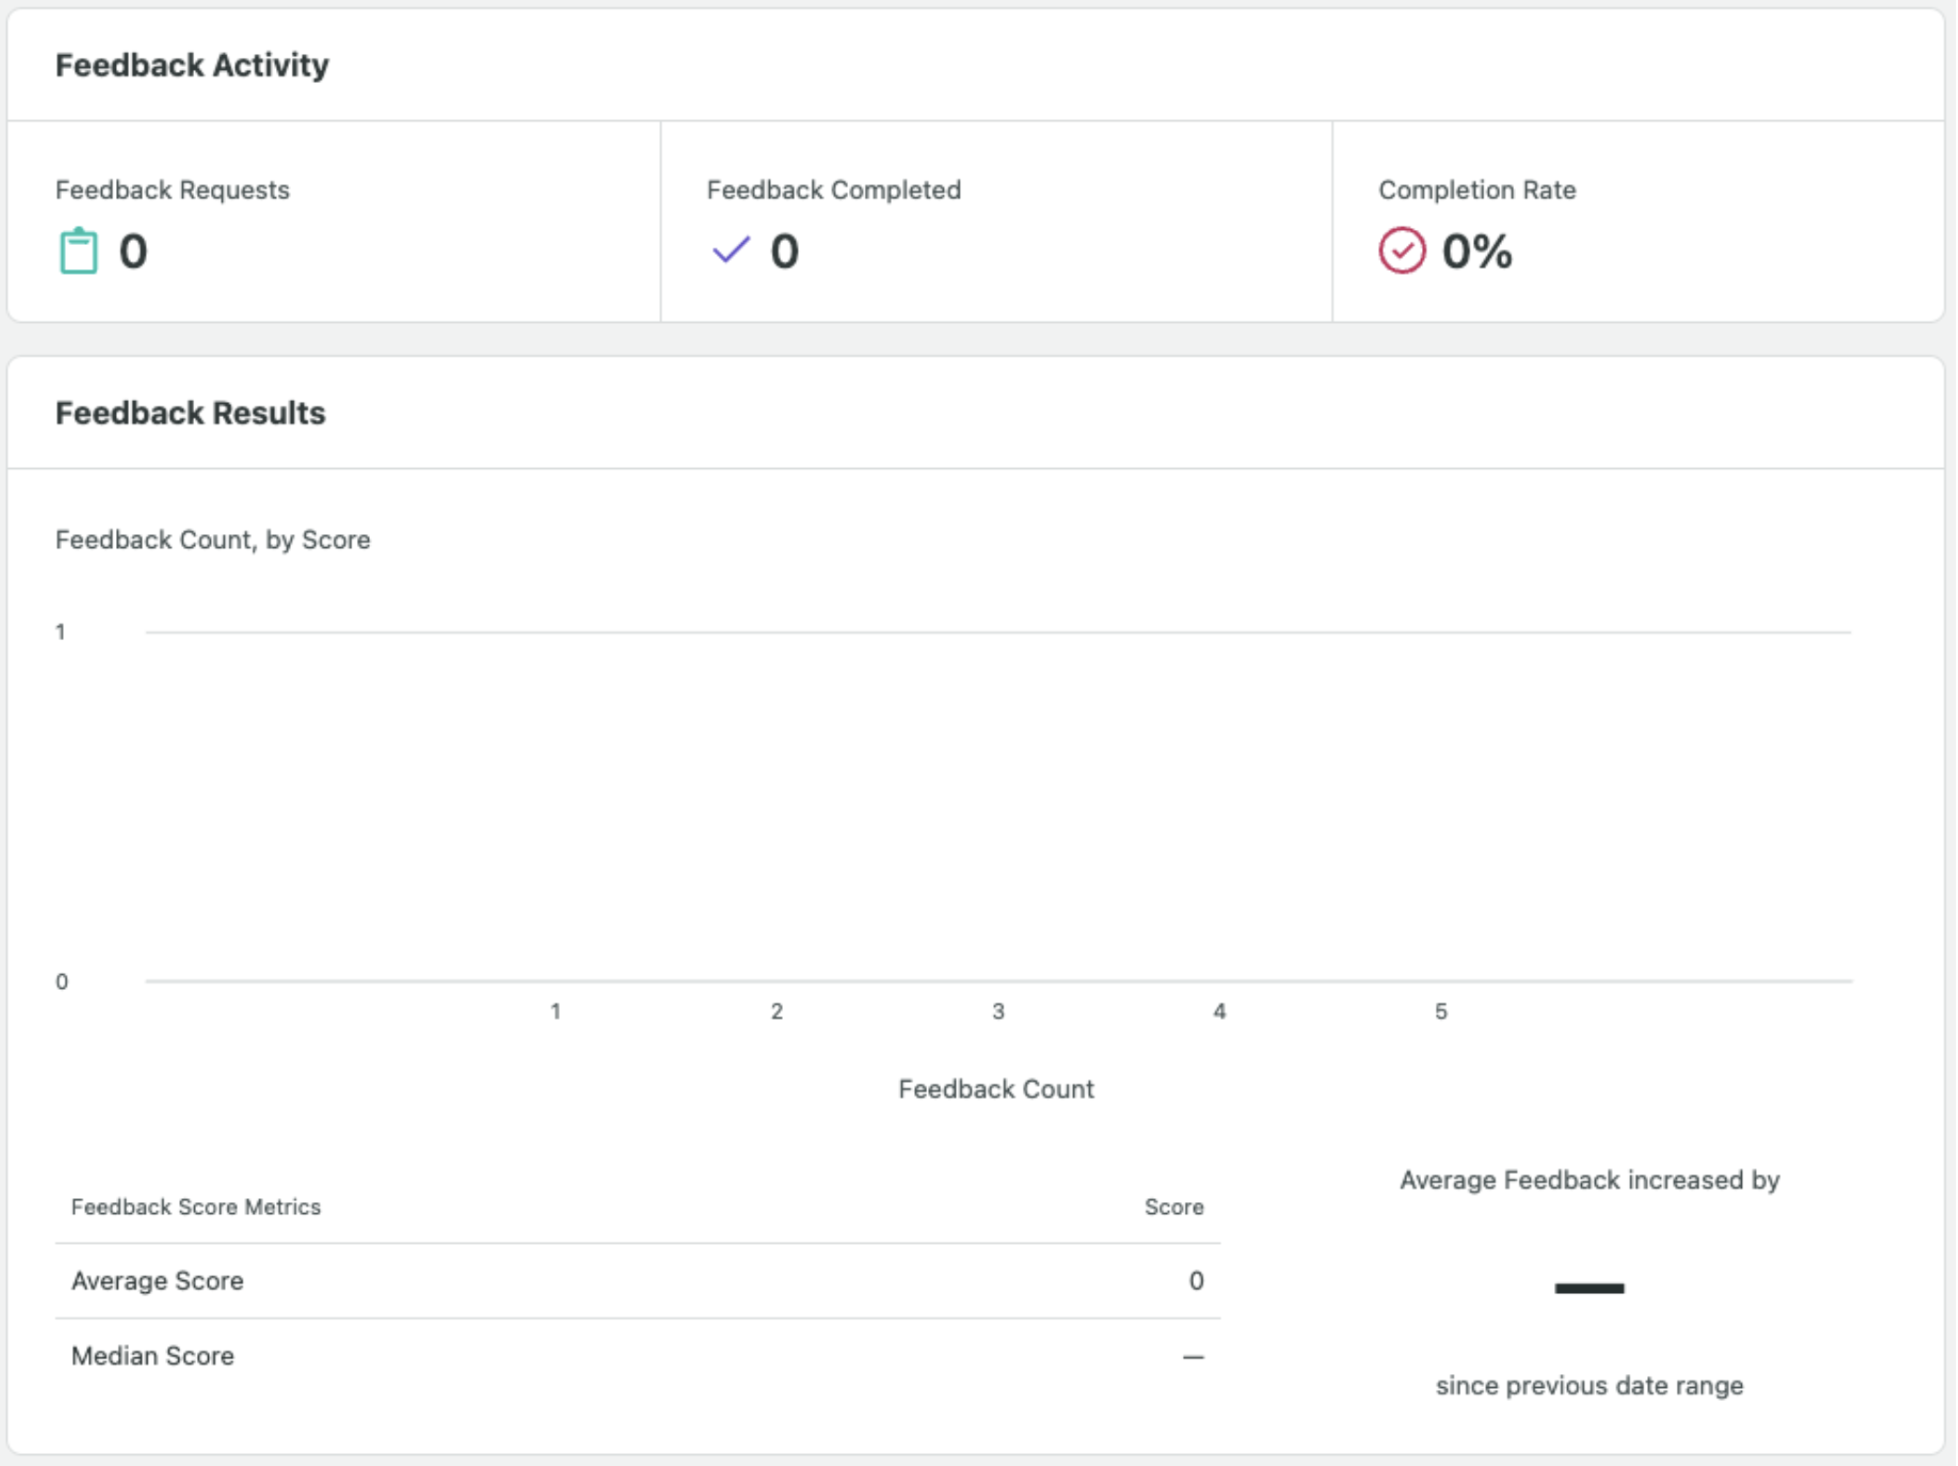 Preview of Sprout’s Feedback Activity dashboard showing feedback requests, feedback completed and completion rate.